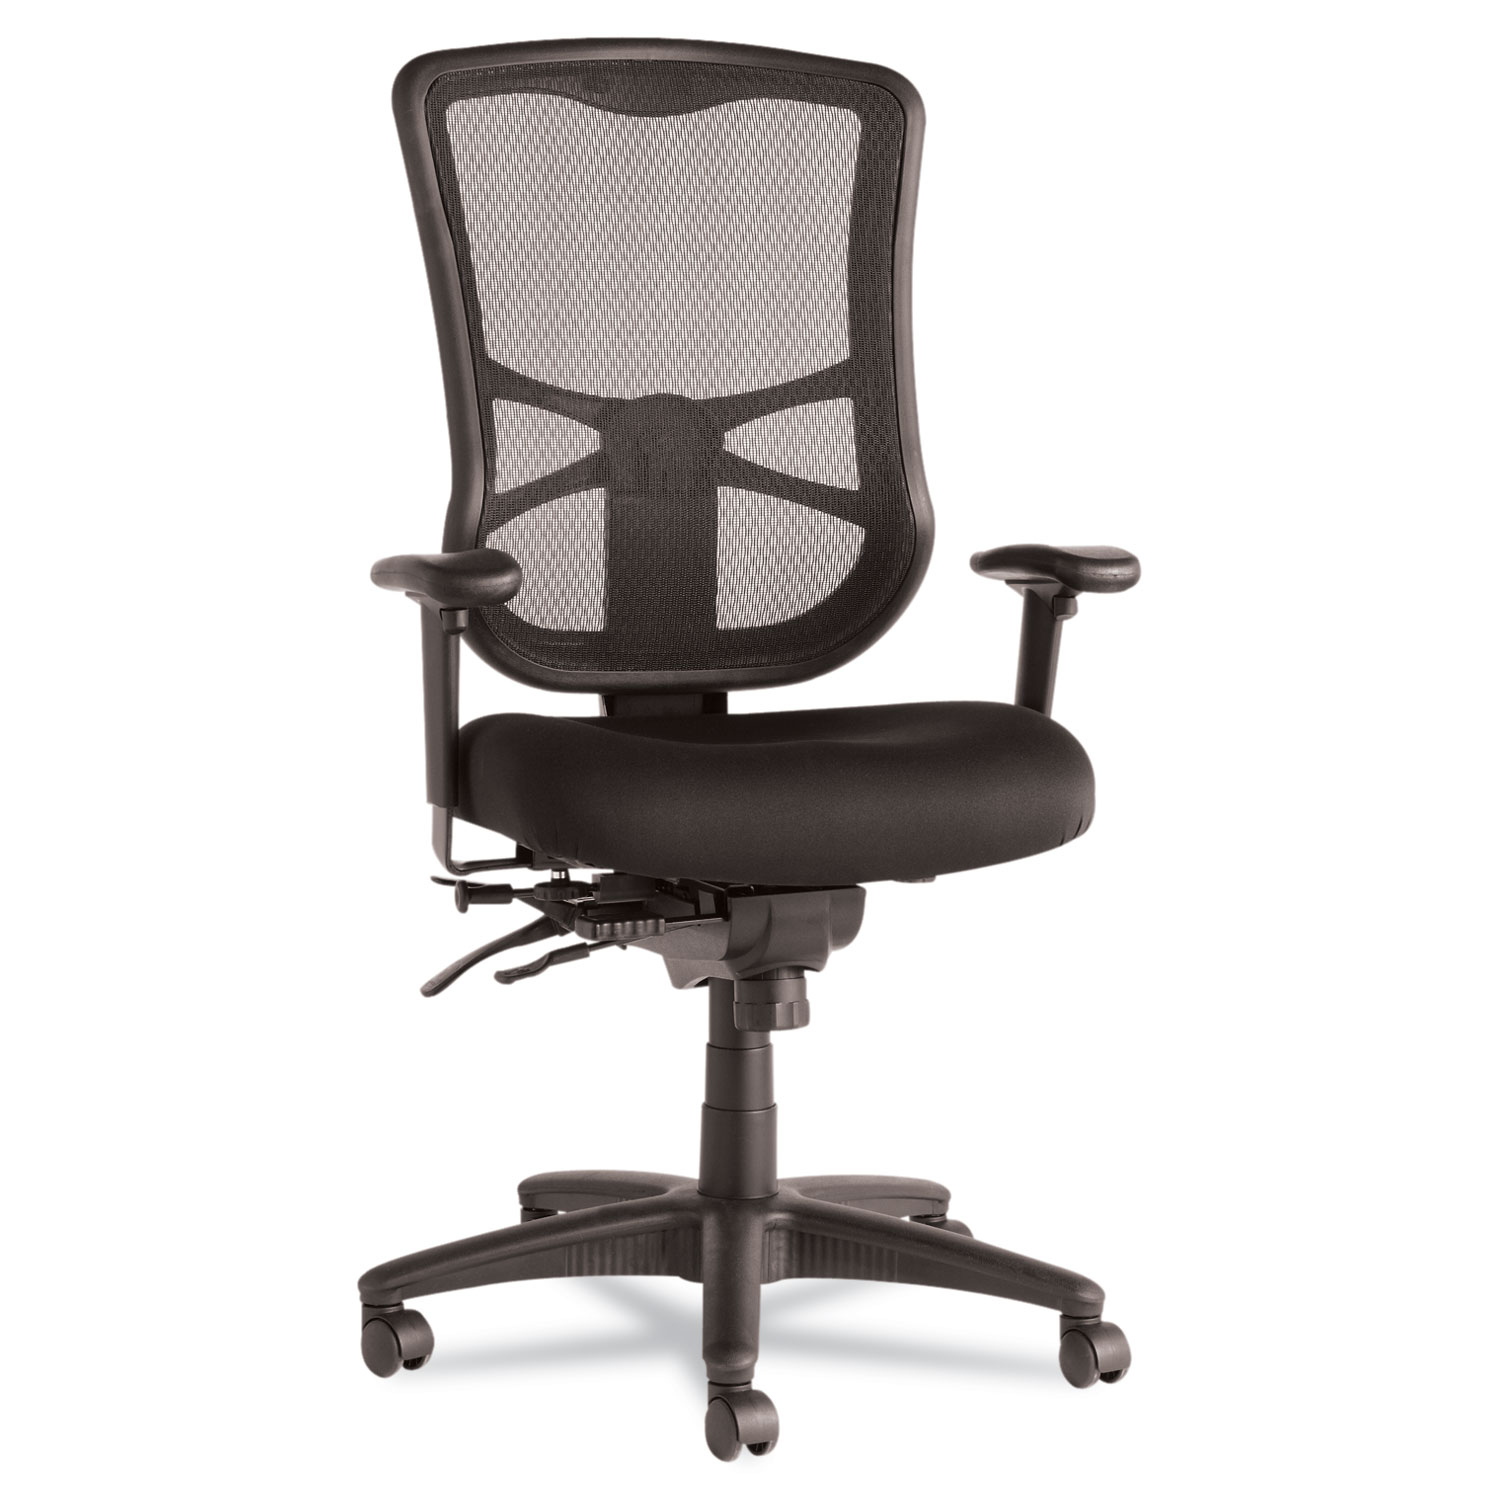  Alera ALEEL41ME10B Alera Elusion Series Mesh High-Back Multifunction Chair, Supports up to 275 lbs., Black Seat/Black Back, Black Base (ALEEL41ME10B) 